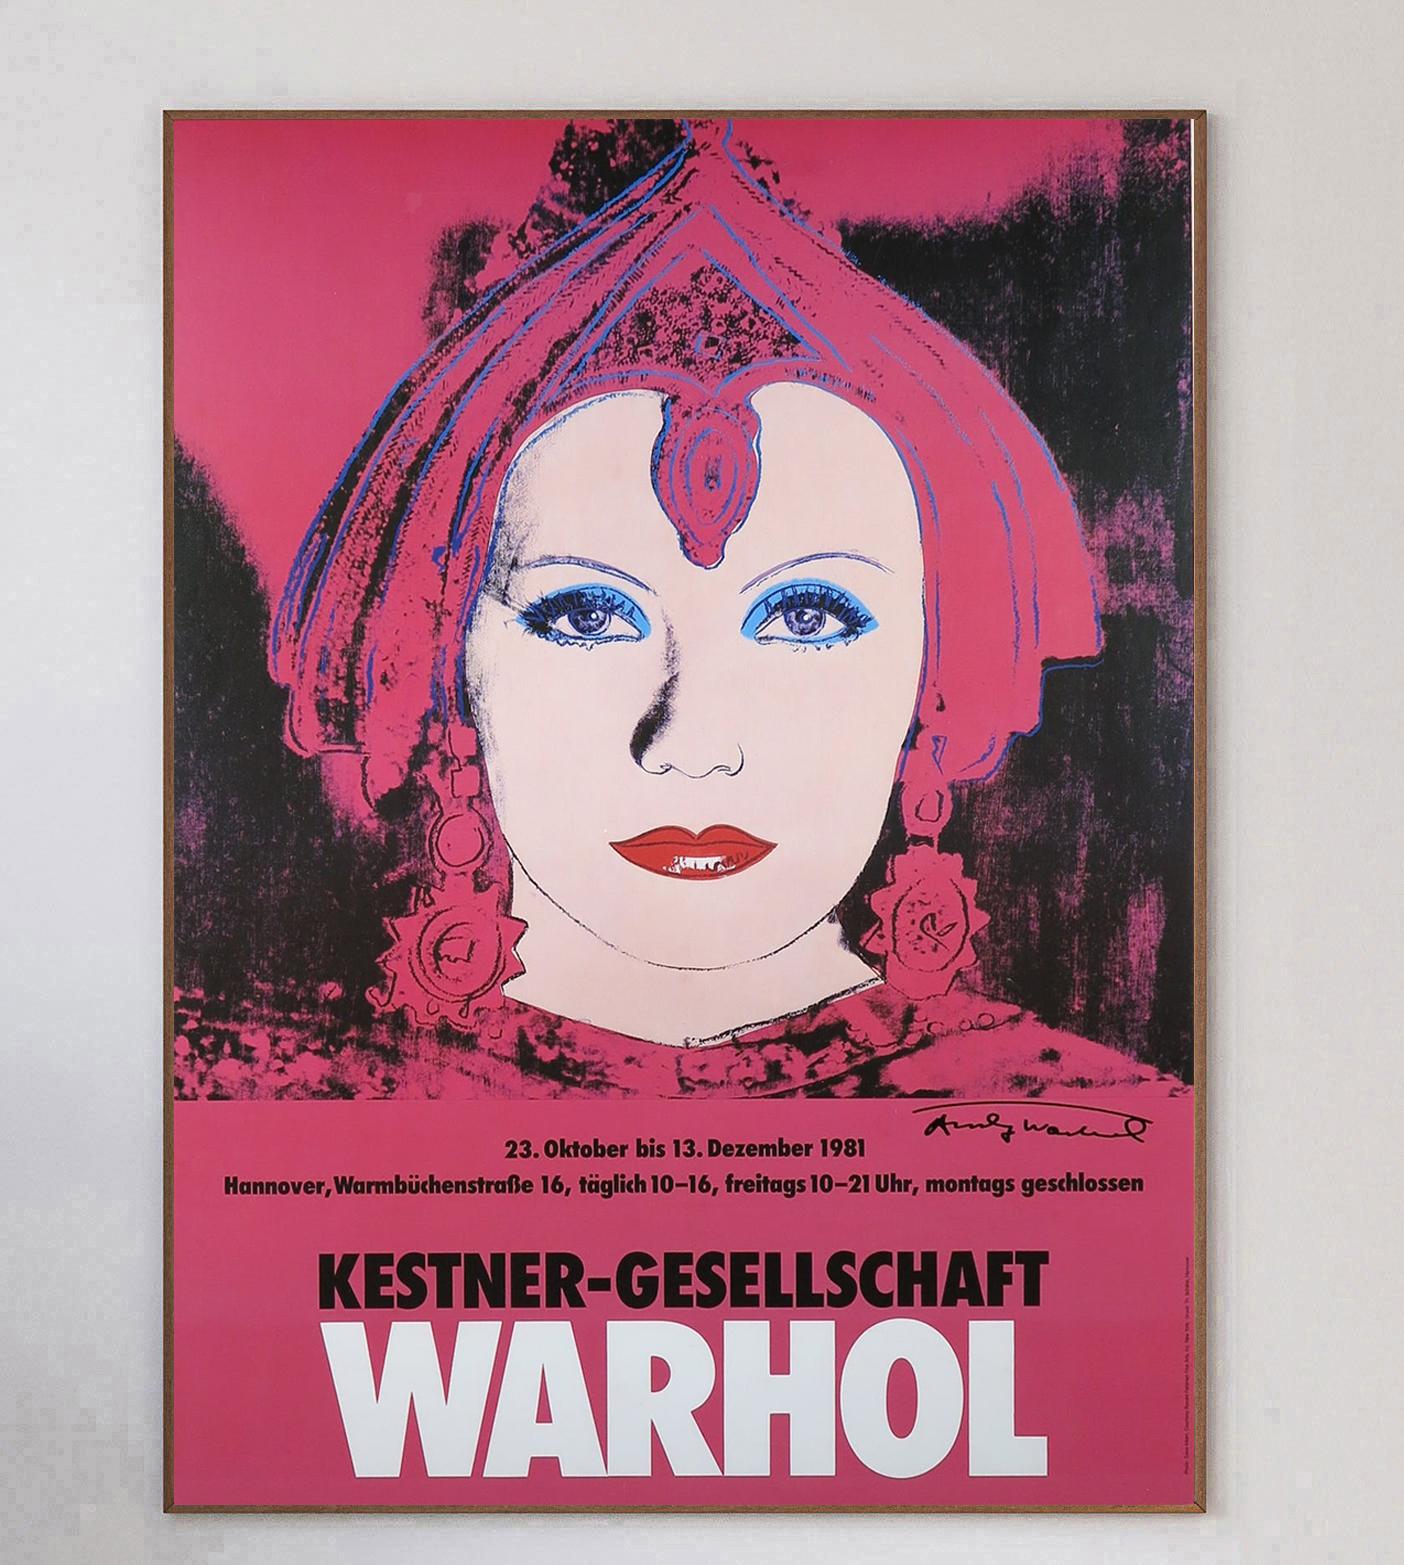 This wonderful poster was created for the Andy Warhol exhibition at the Kestner-Gesellschaft in Hannover, Germany. Running from October to December 1981, the exhibition showcased some of the artists key pieces.

Featuring his iconic portrait of